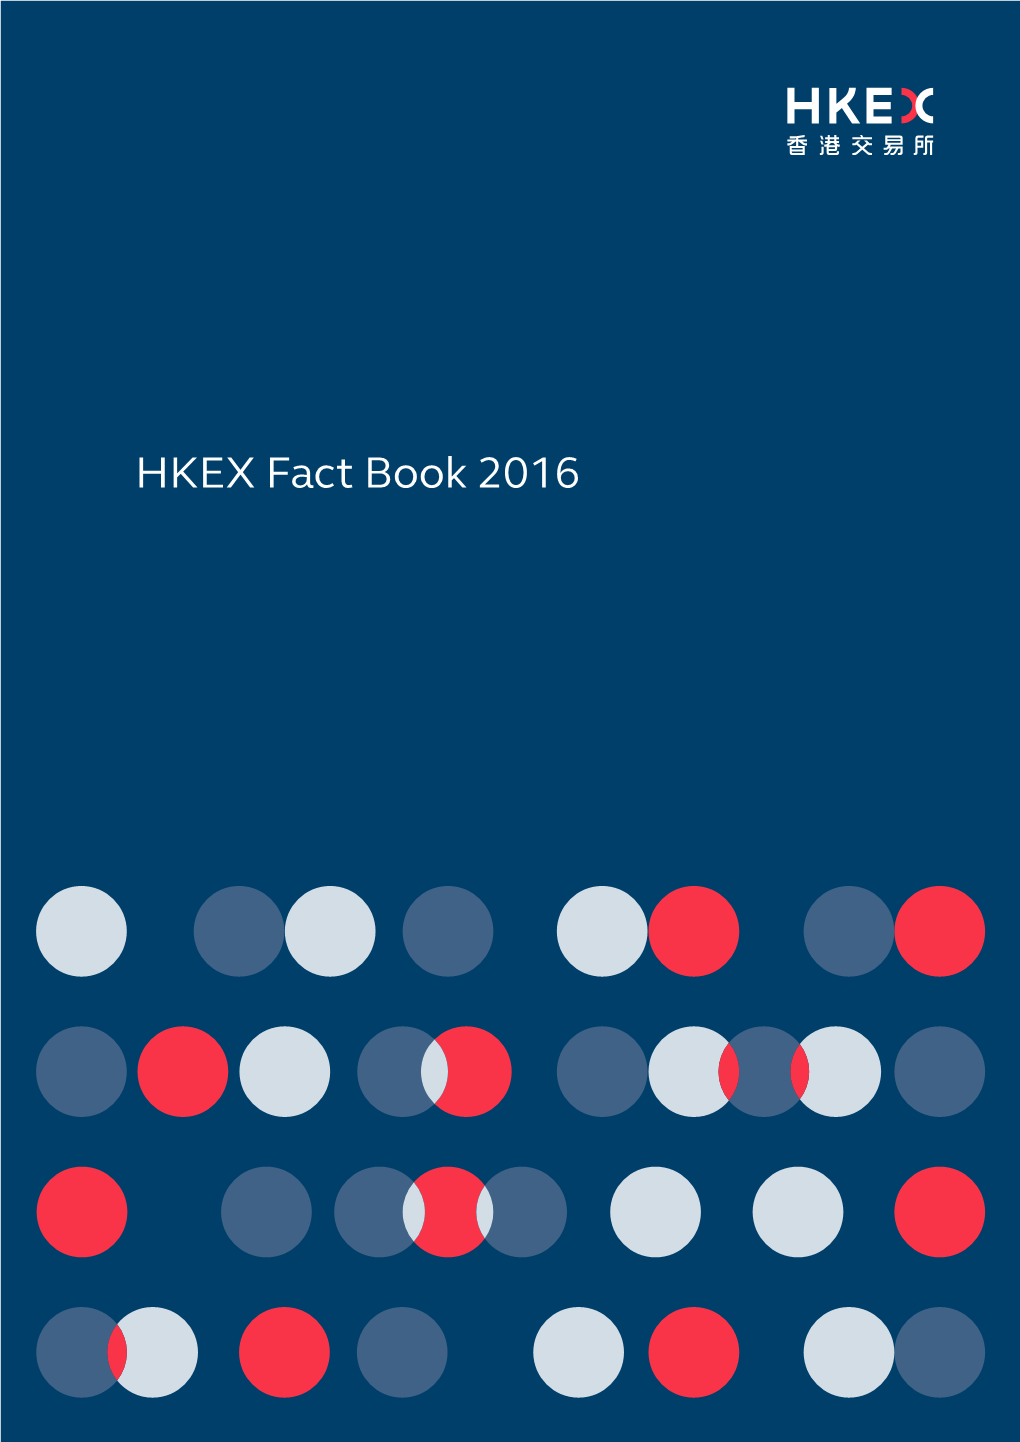 HKEX Fact Book 2016 Contents of HKEX Fact Book 2016